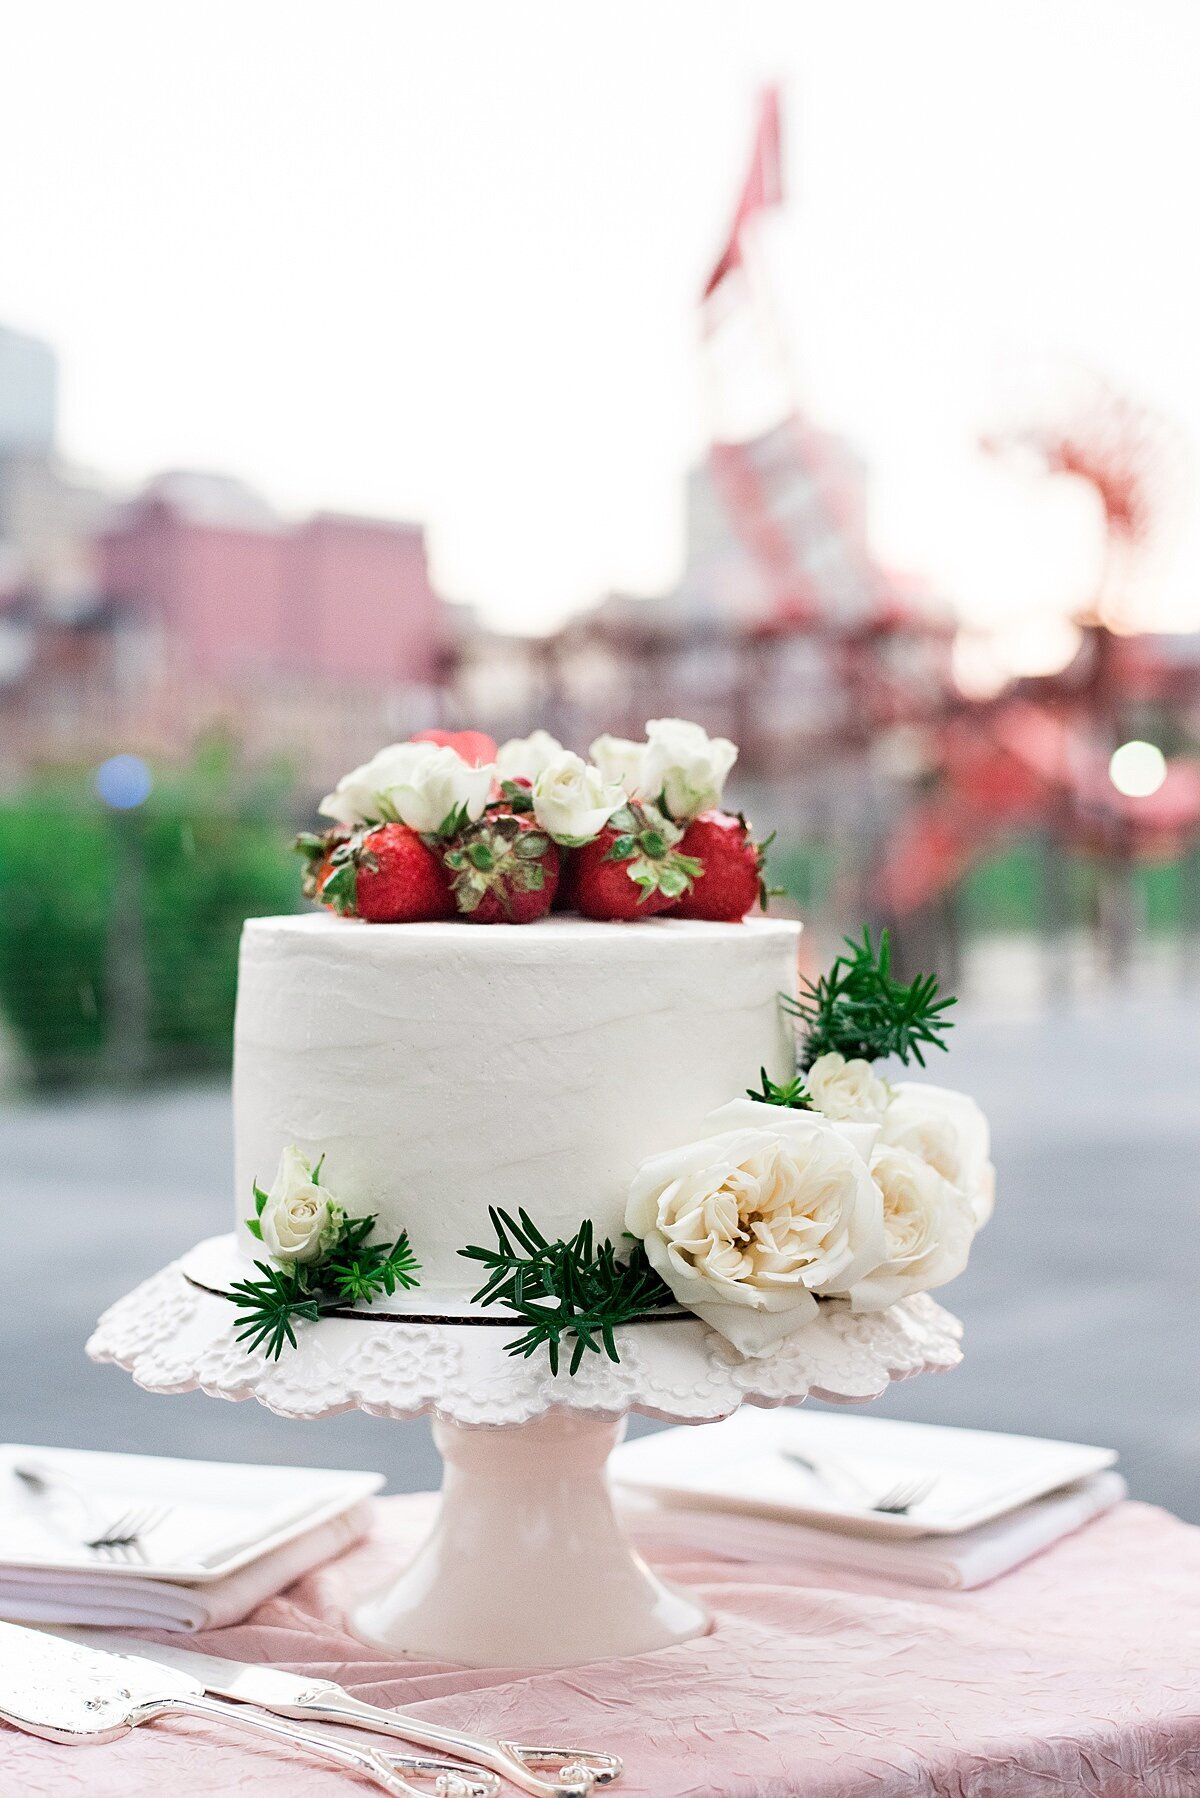 A one tier white wedding cake sits on a white pedestal cake stand. The cake stand is placed on a table with a pink table cloth, two white square plates with forks and a silver cake knife and server set. The cake is decorated with rosemary, white roses and strawberries.